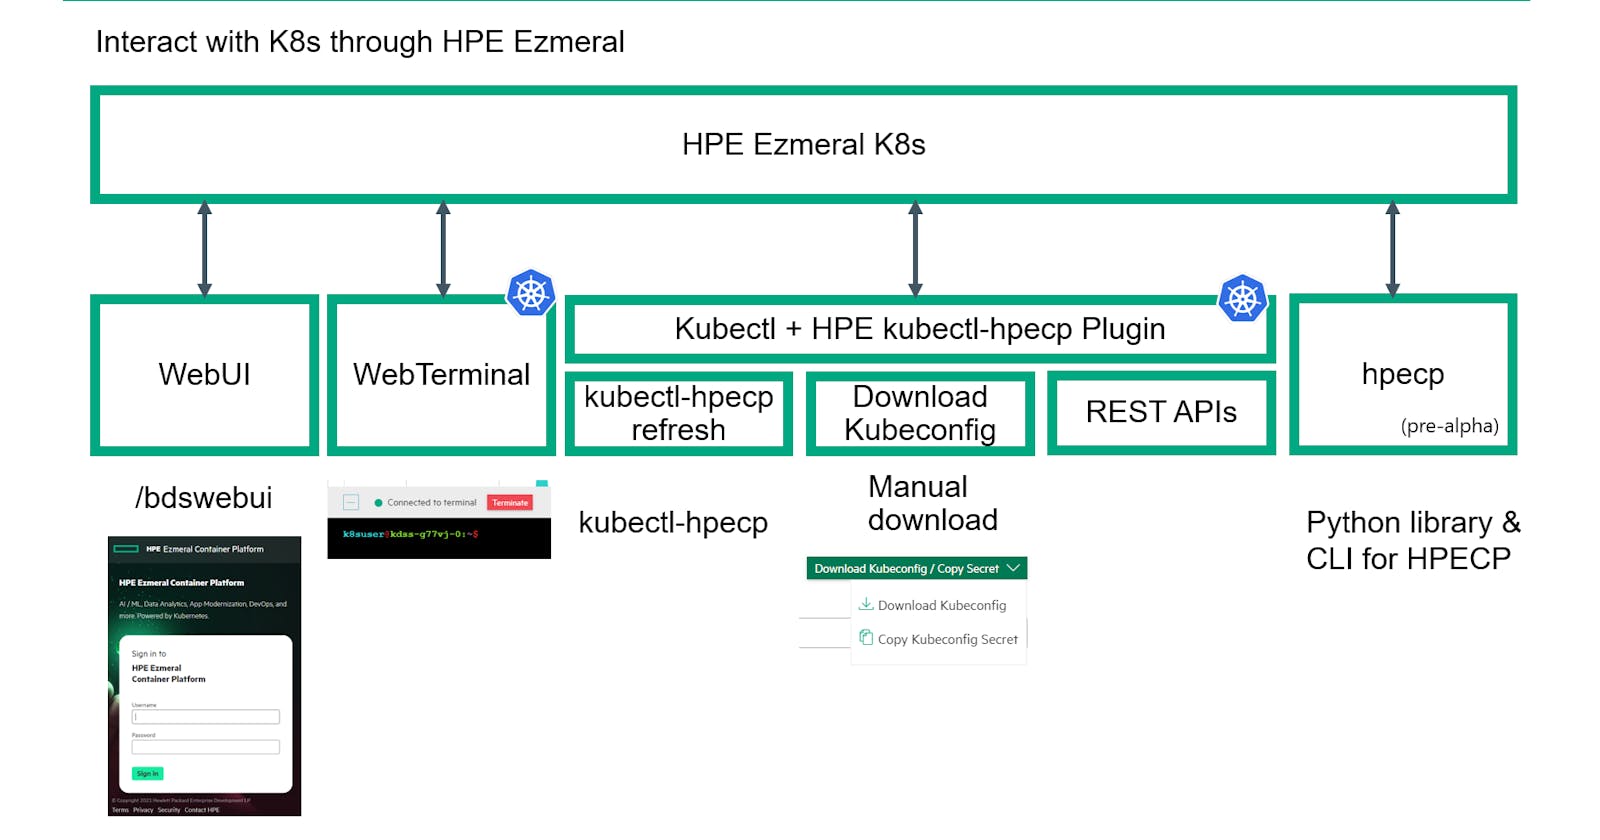 [HPE Dev] Ways to interact with Kubernetes Clusters managed by HPE Ezmeral Container Platform